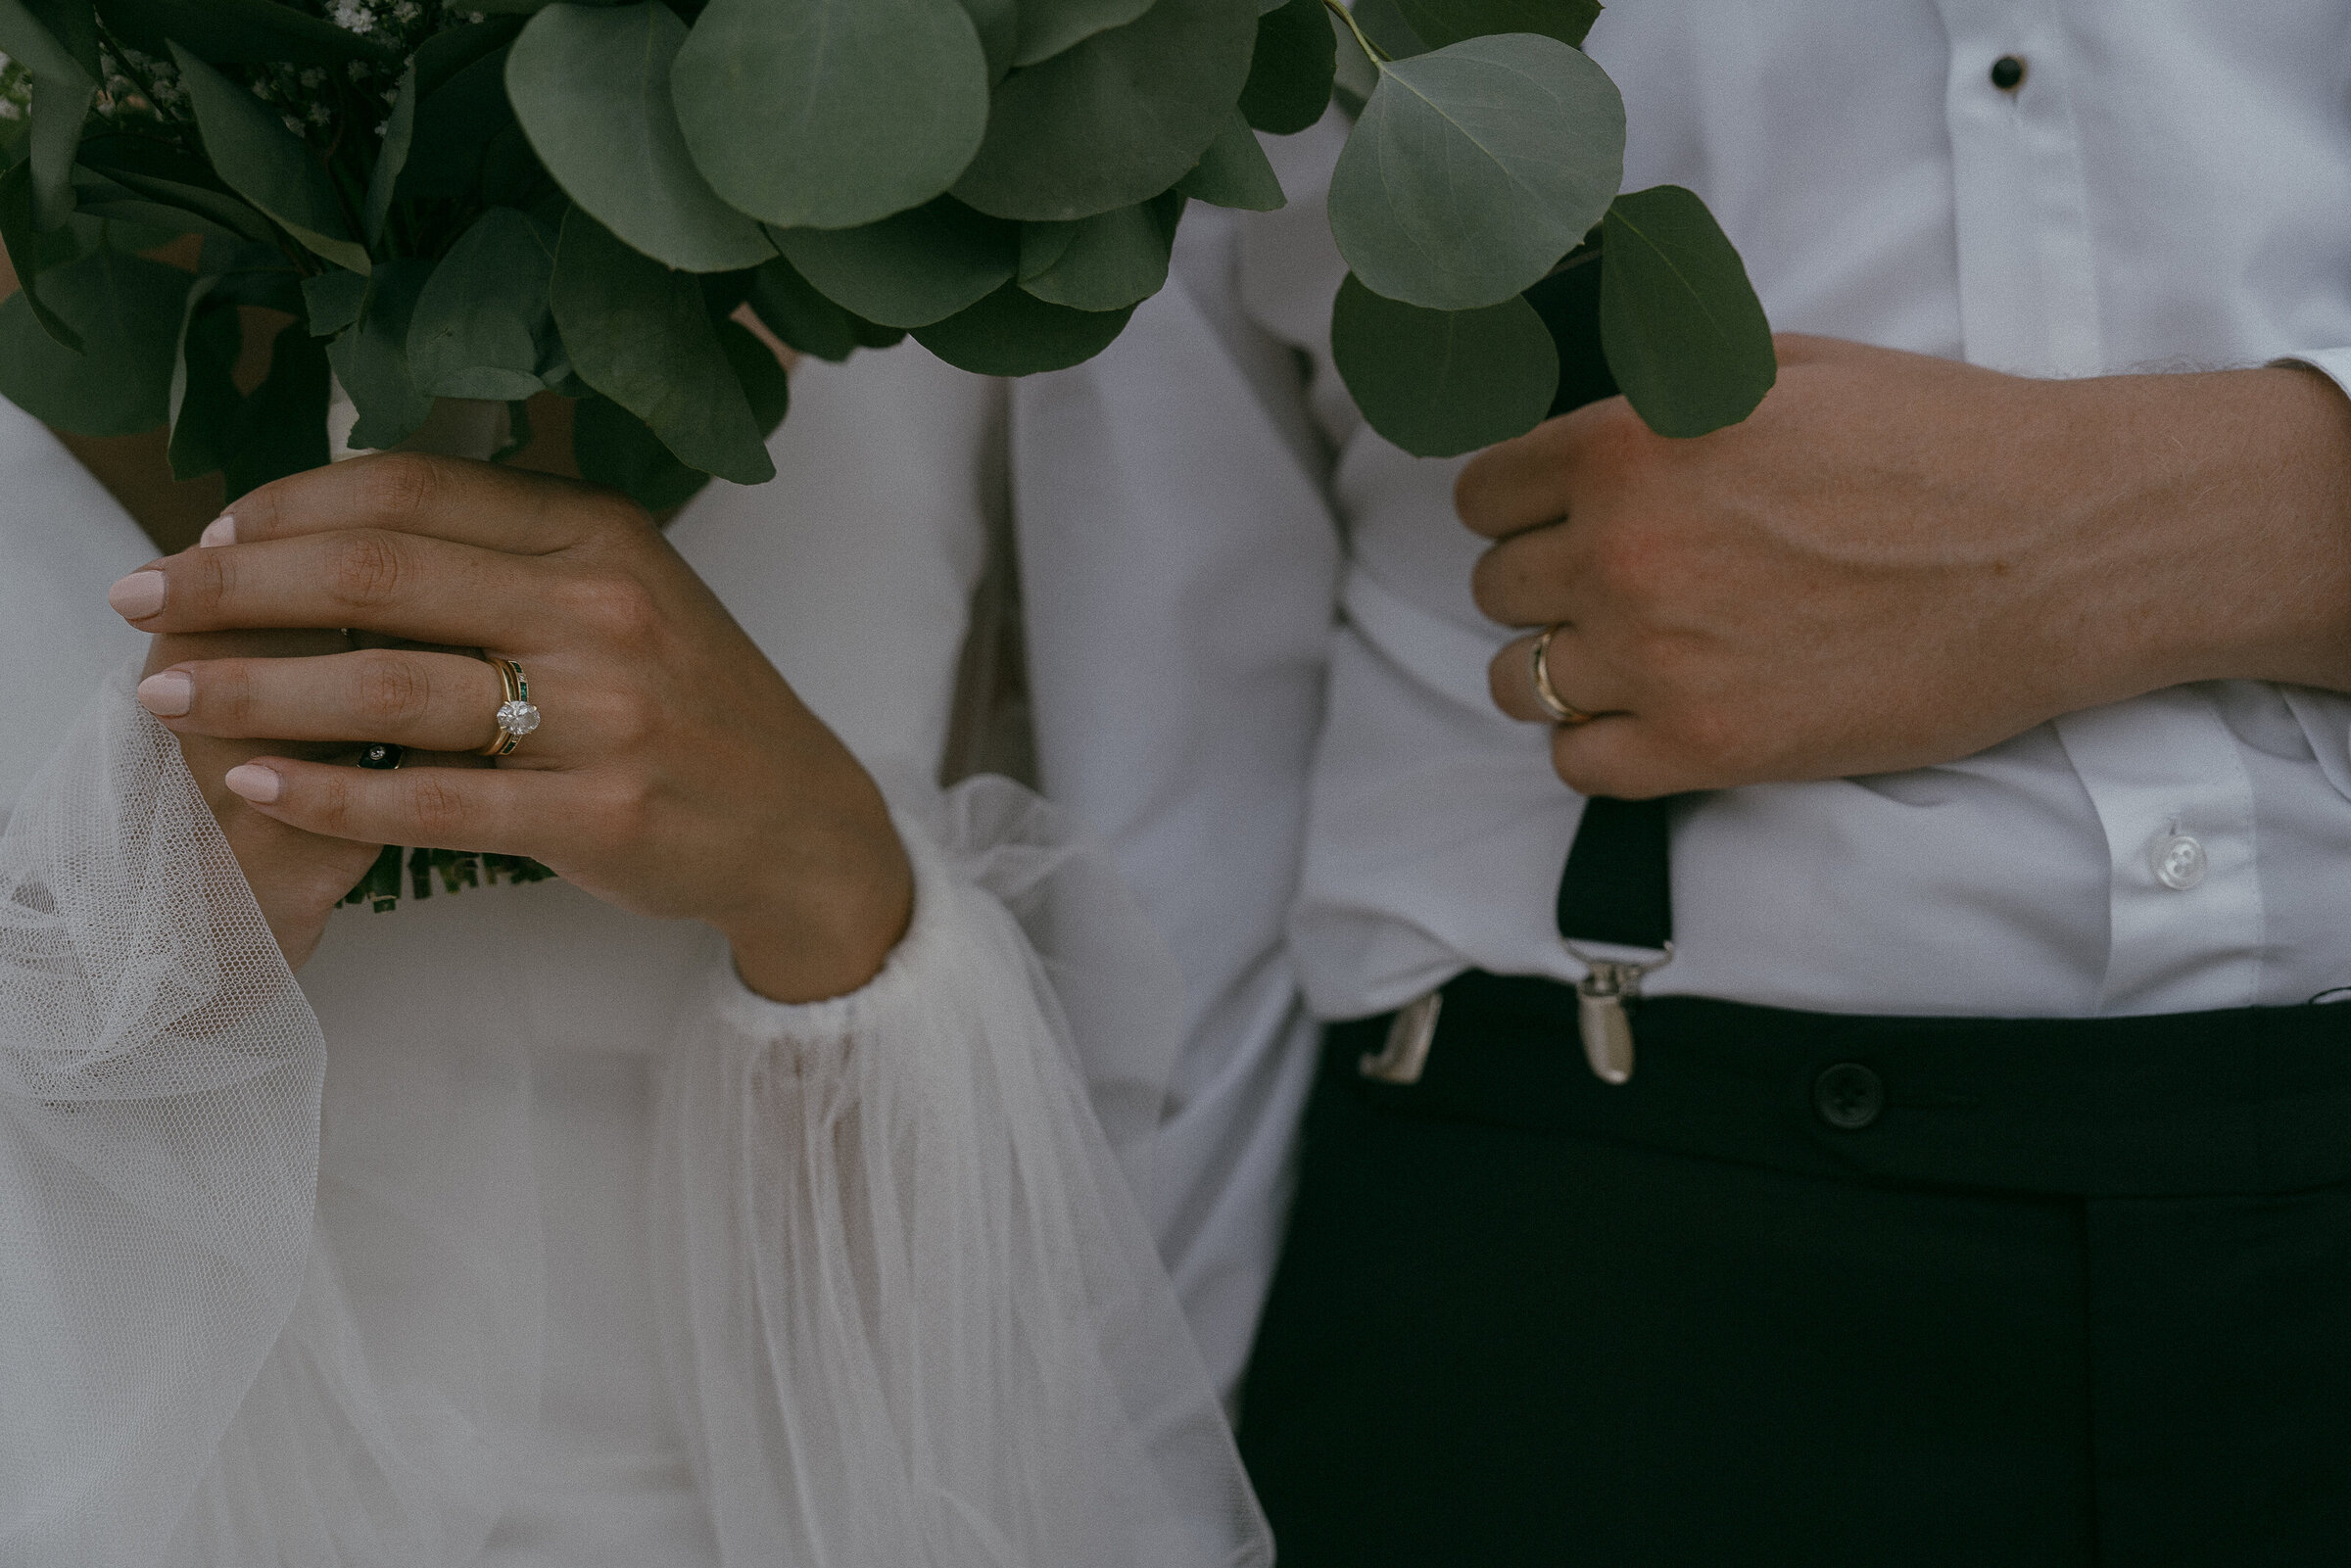 Bride and groom's hands with wedding rings.